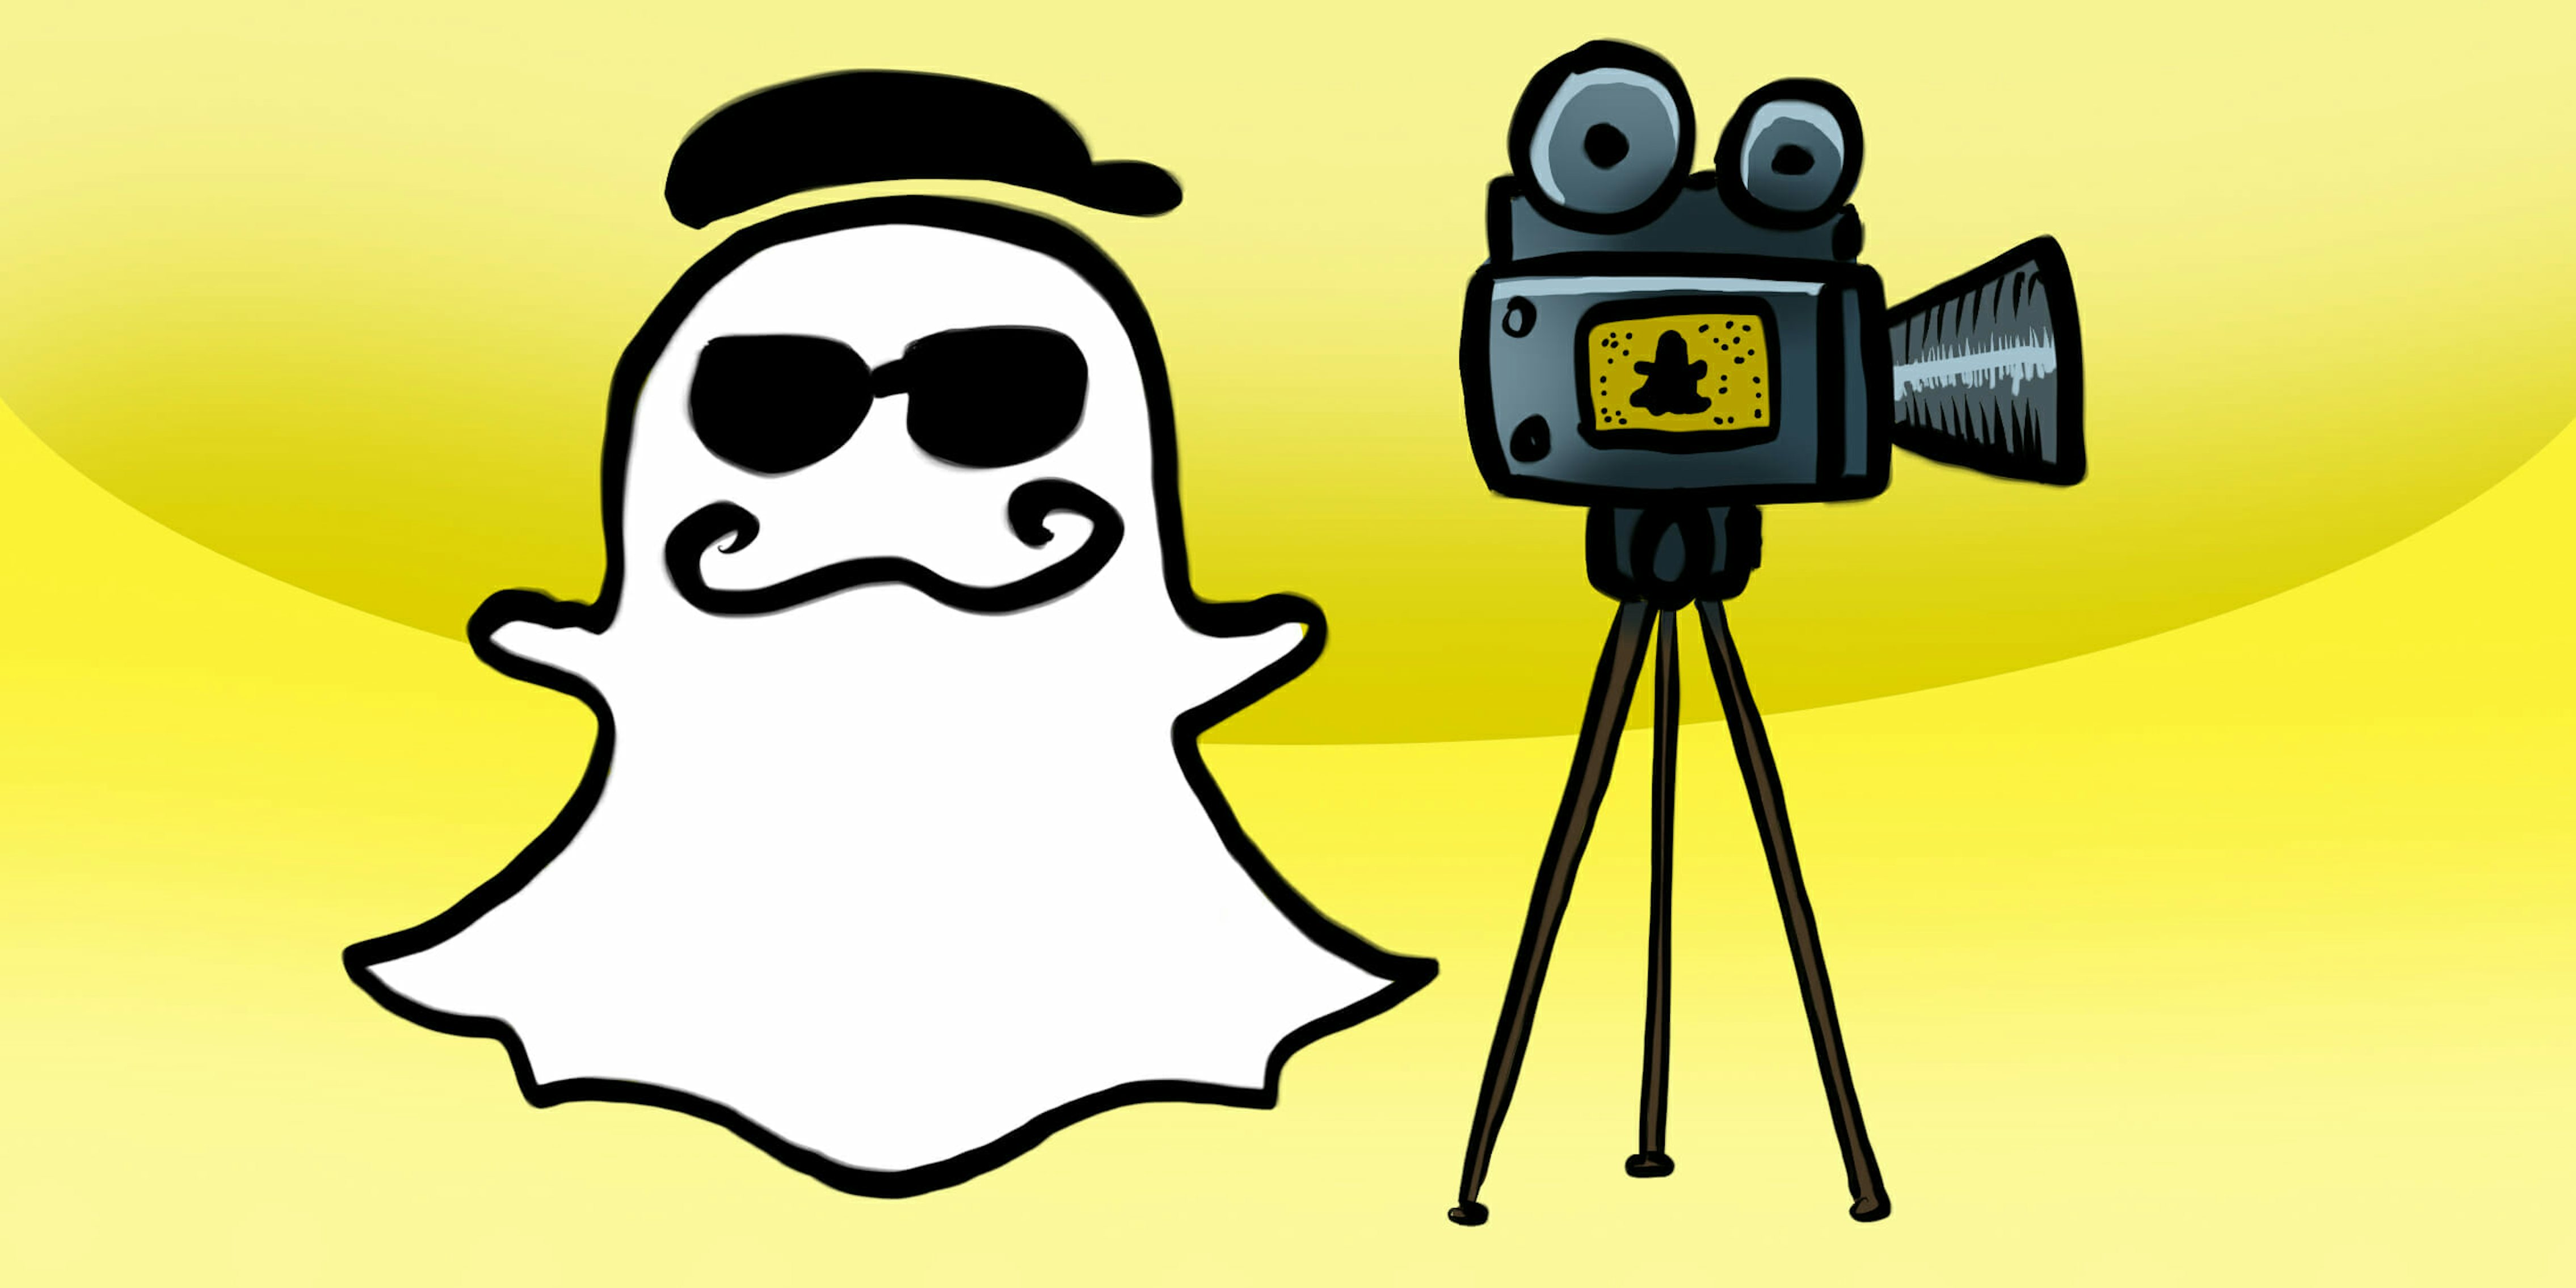 how to save snapchat videos